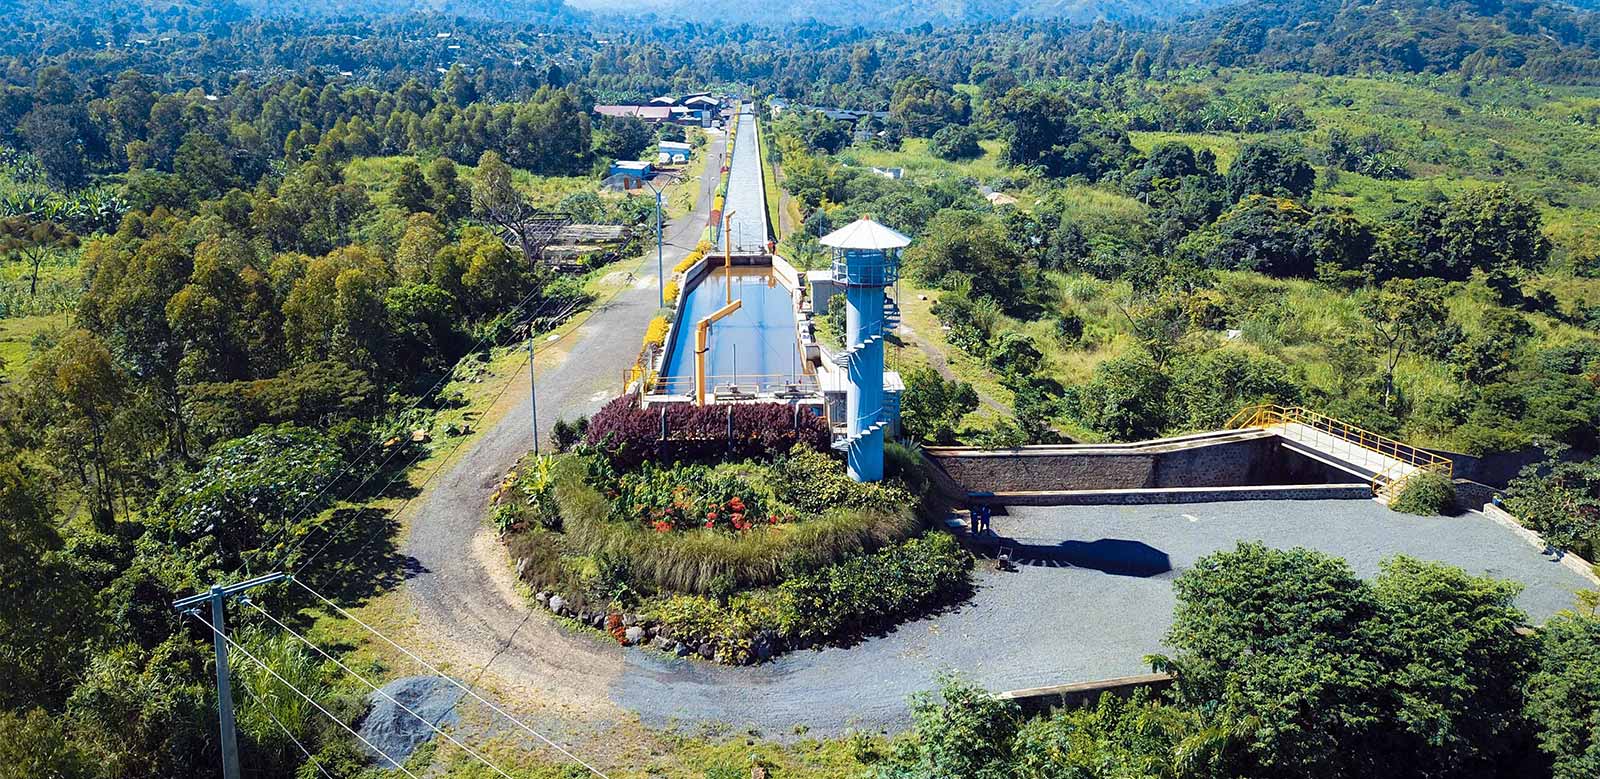 Run-of-river hydroelectric power plant in the Virunga National Park